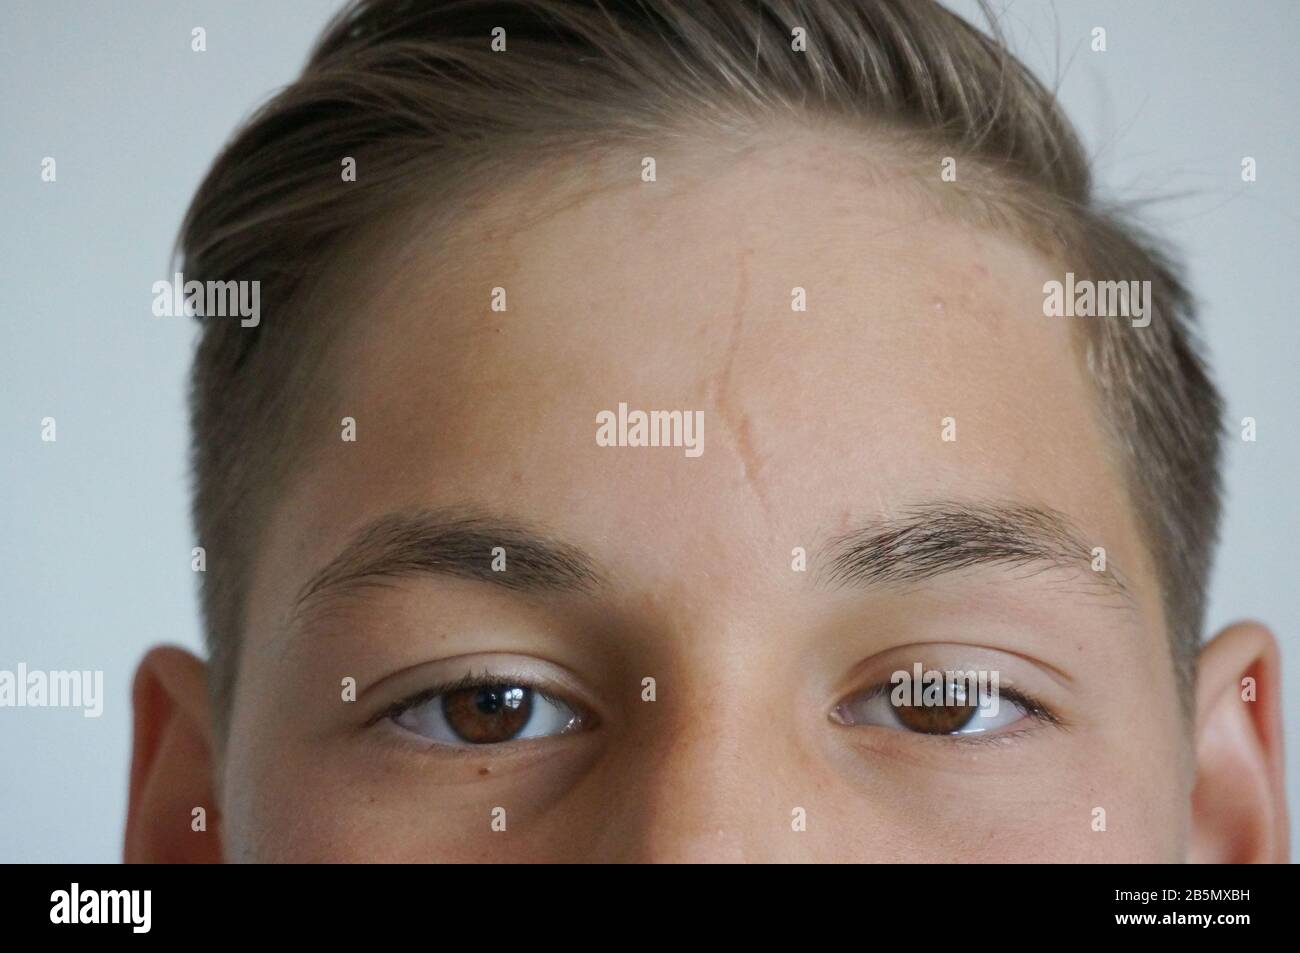 Teenager's forehead close up, young skin imperfection scar and acne Stock Photo